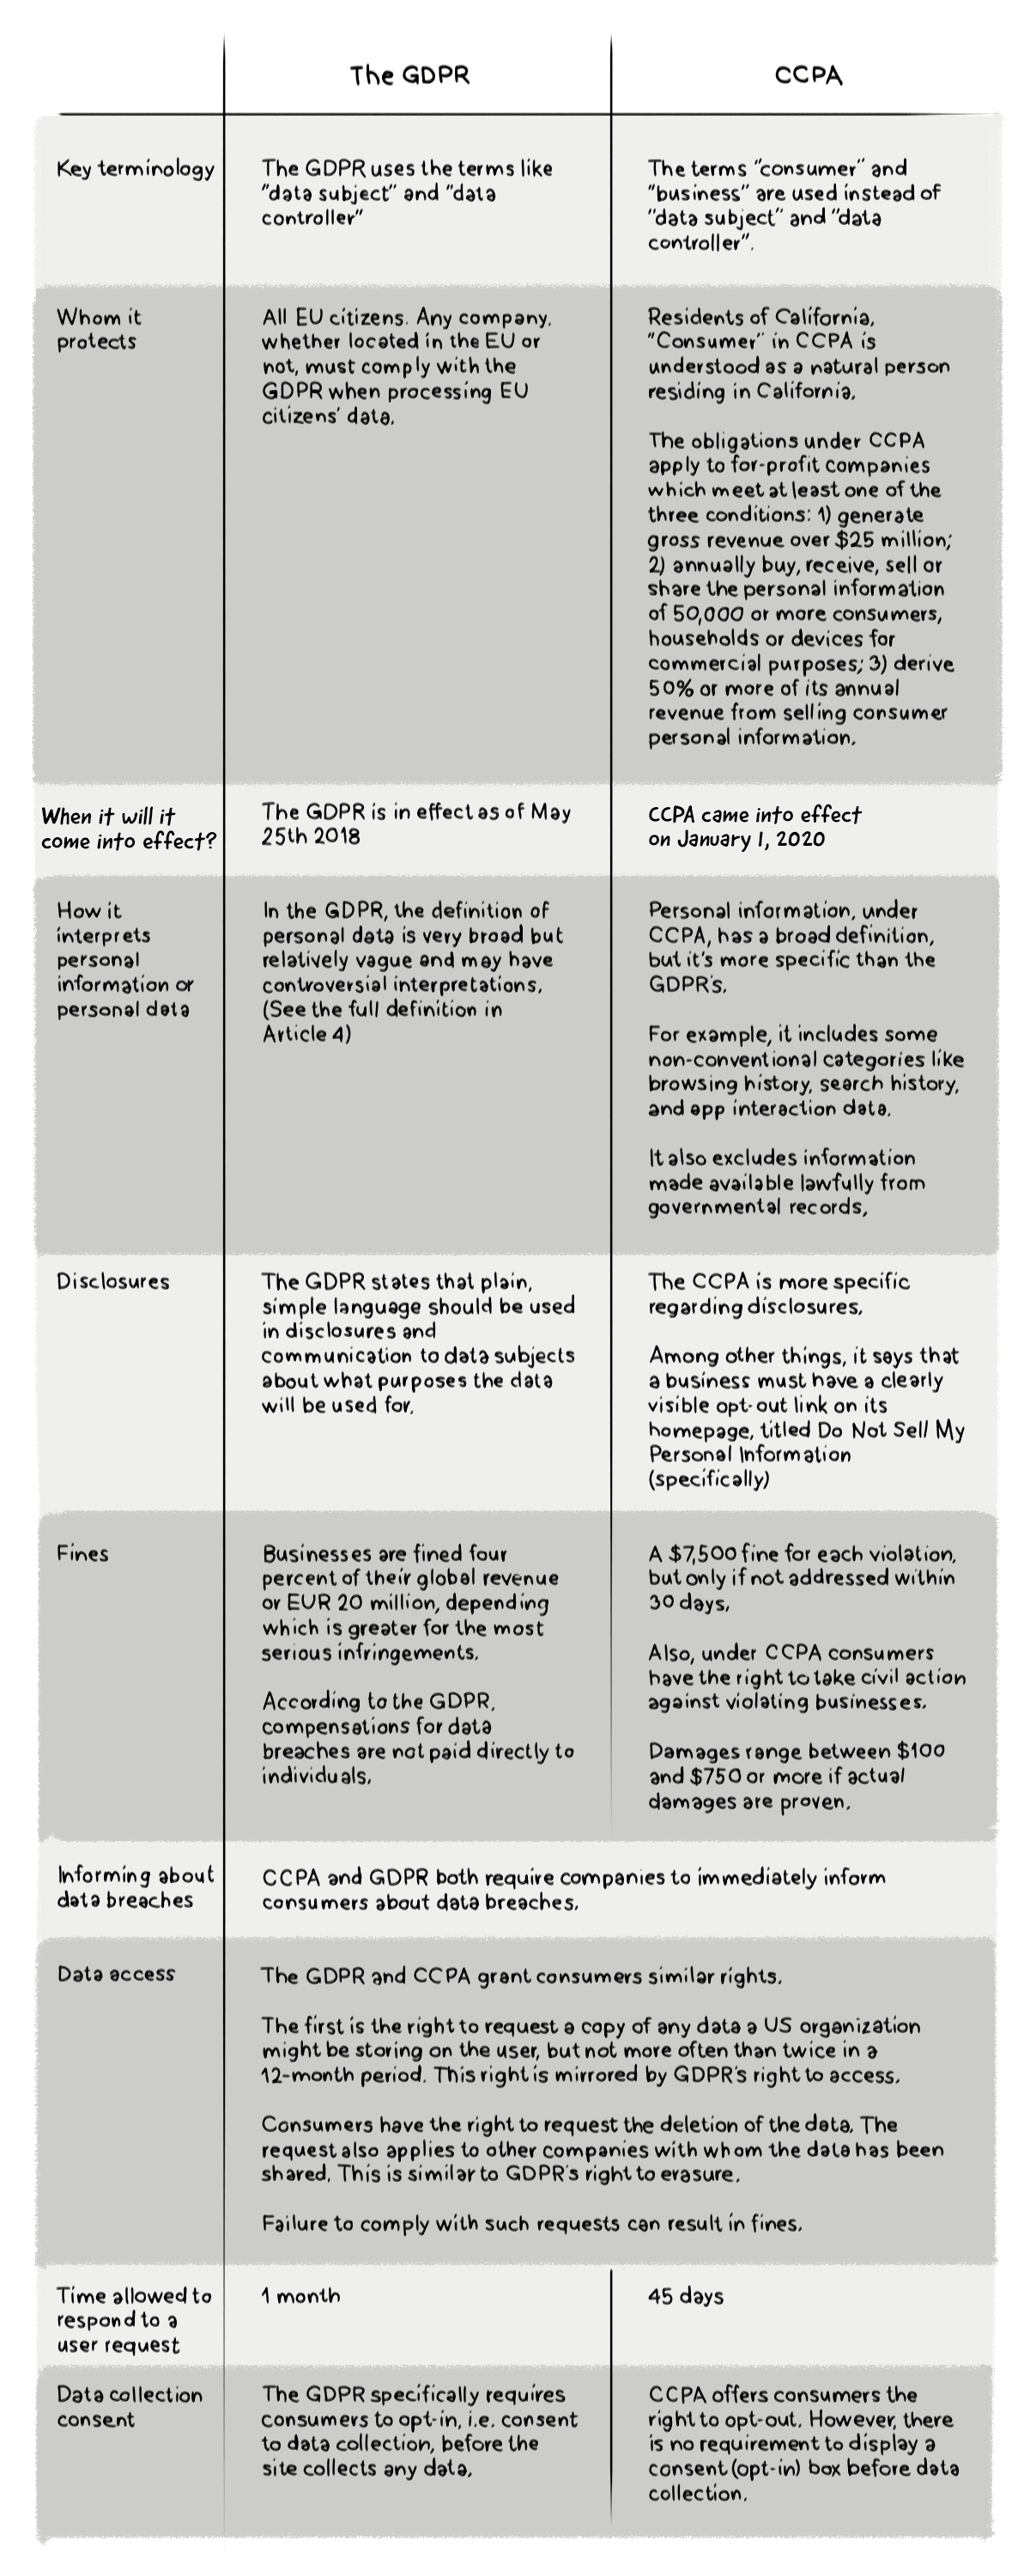 Difference between the GDPR and CCPA